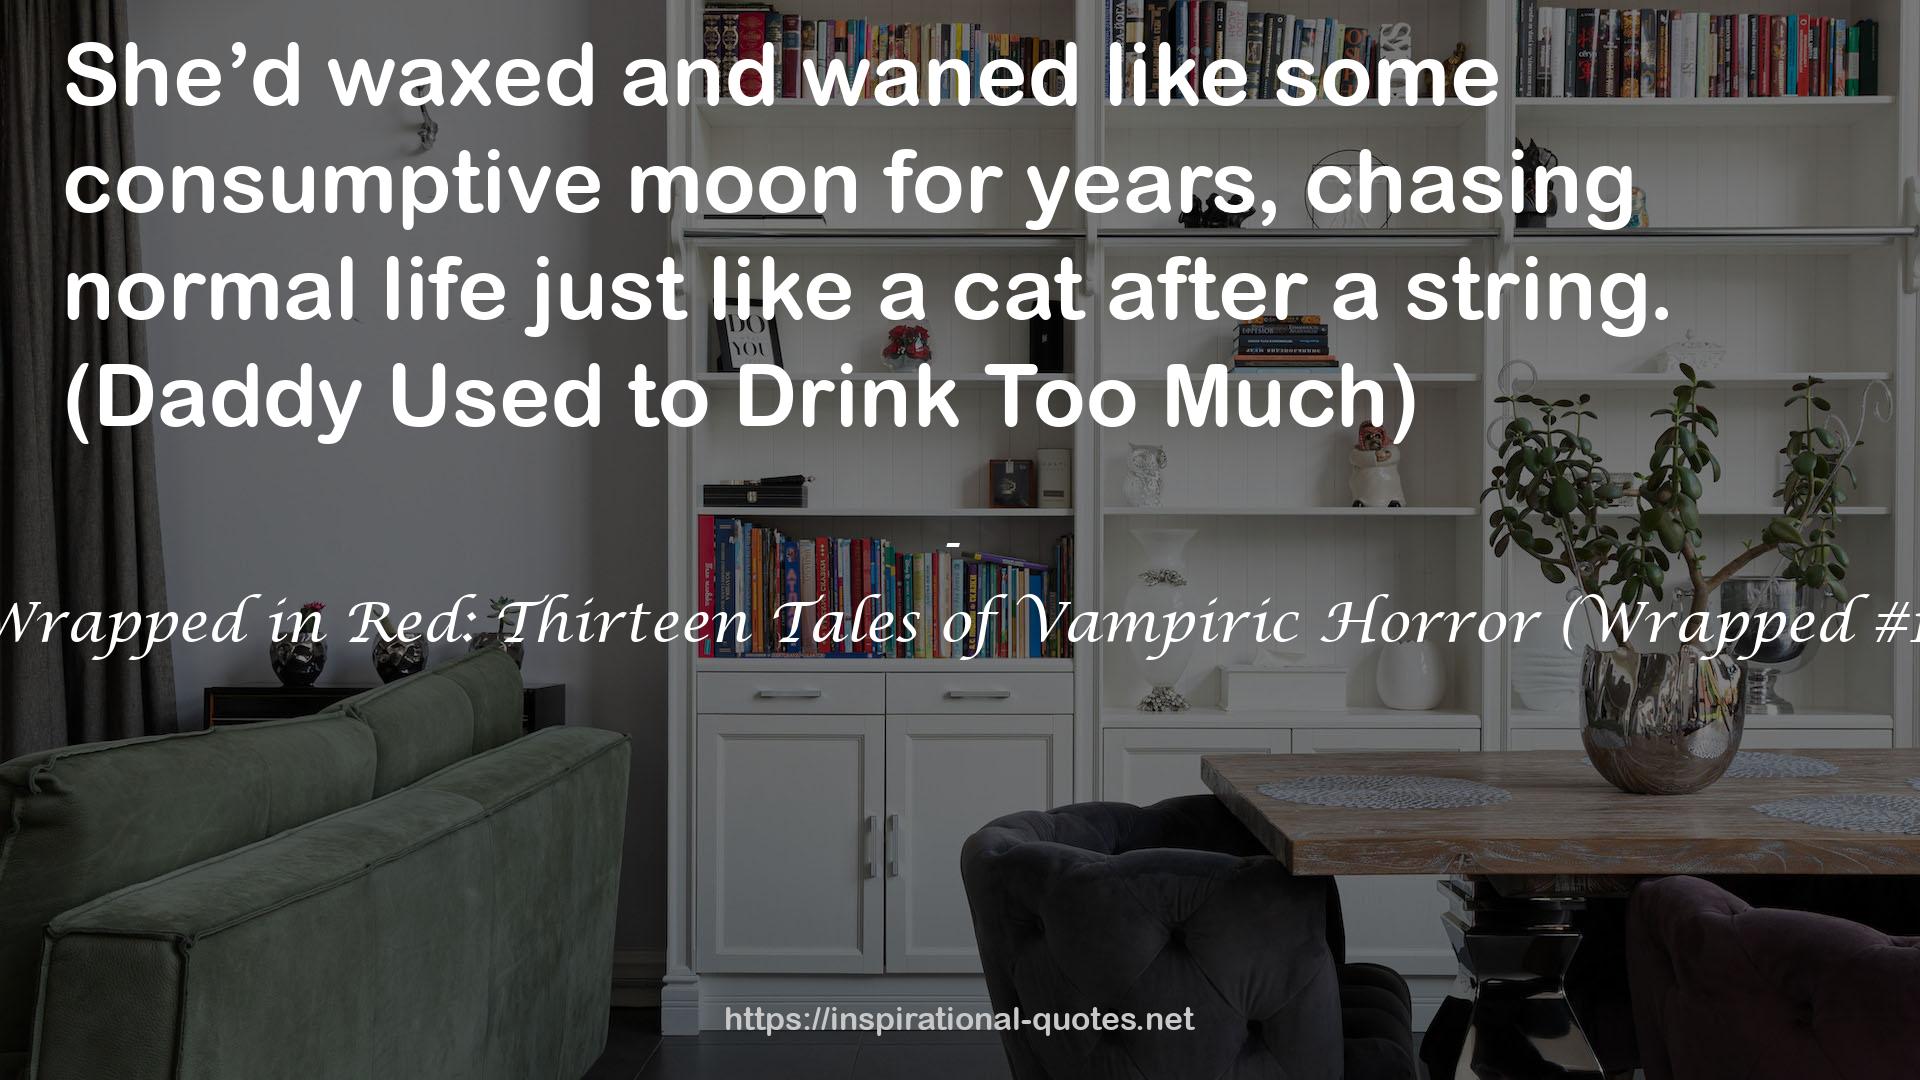 Wrapped in Red: Thirteen Tales of Vampiric Horror (Wrapped #1) QUOTES